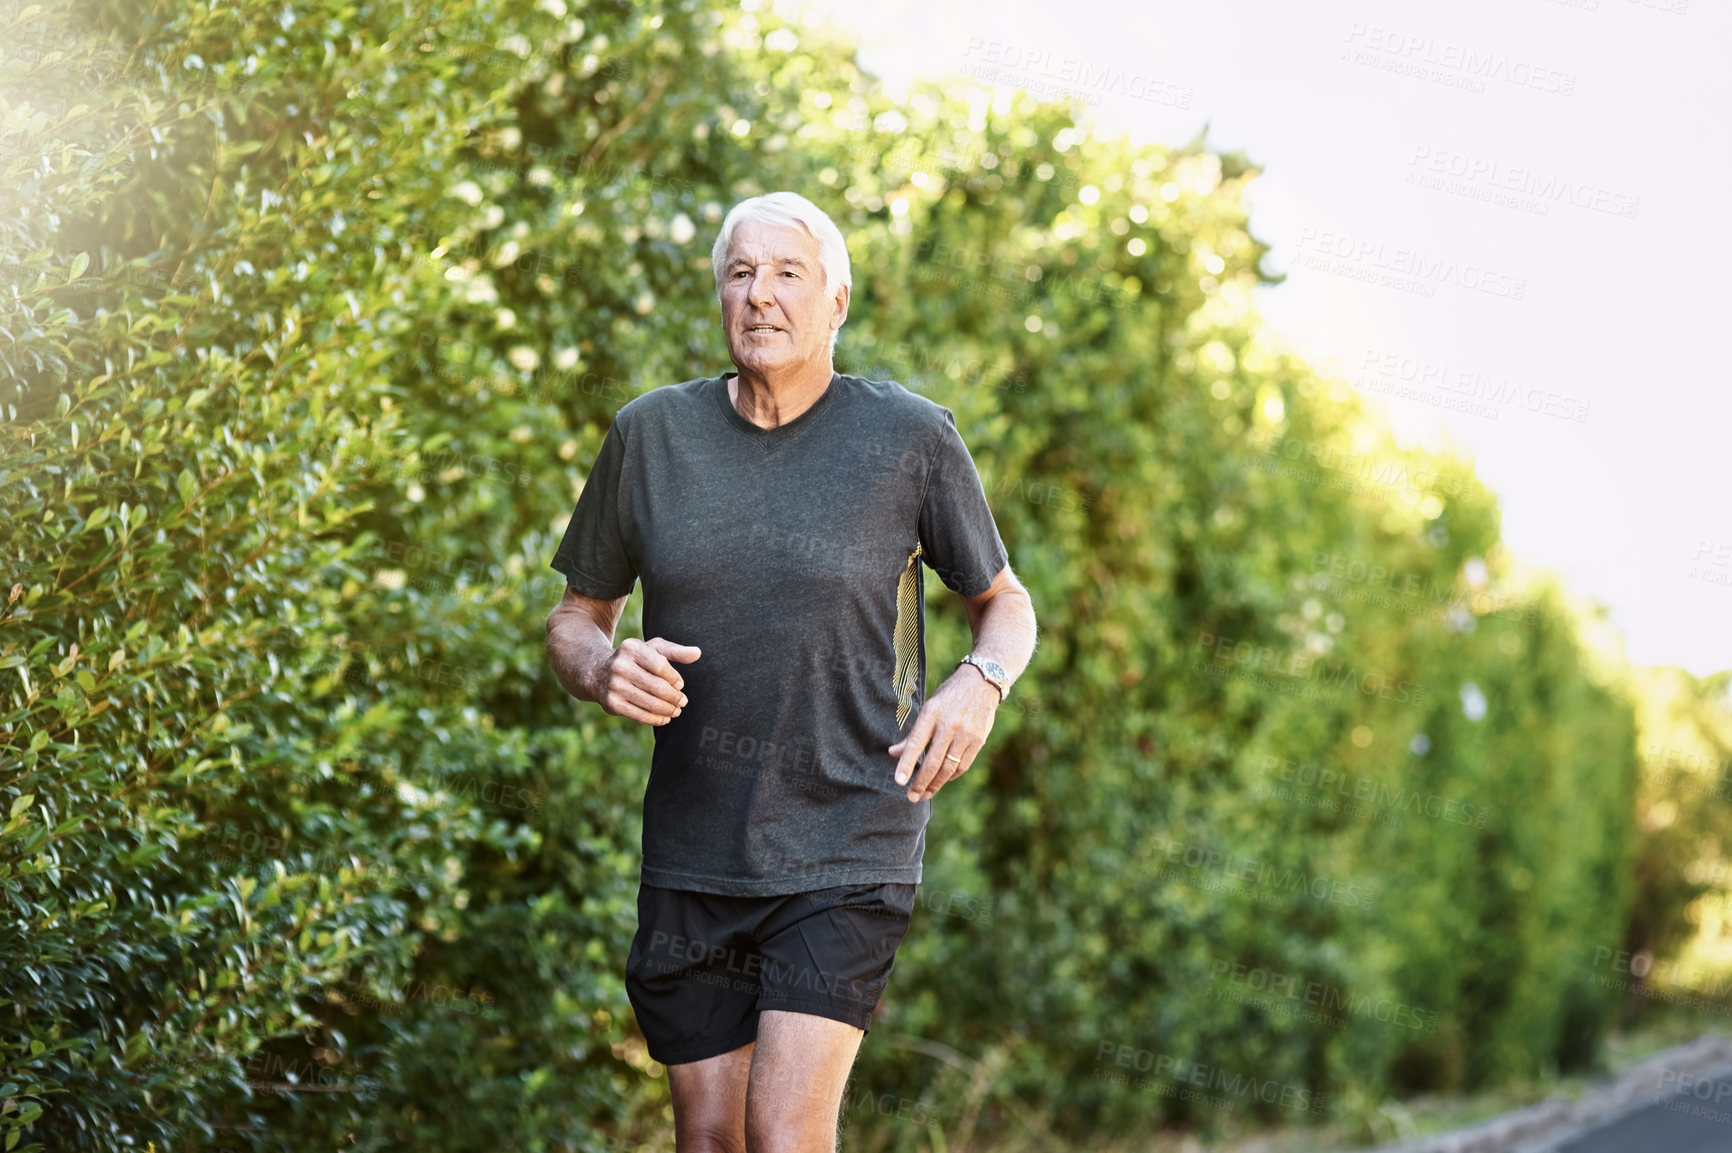 Buy stock photo Shot of a senior man out for a run